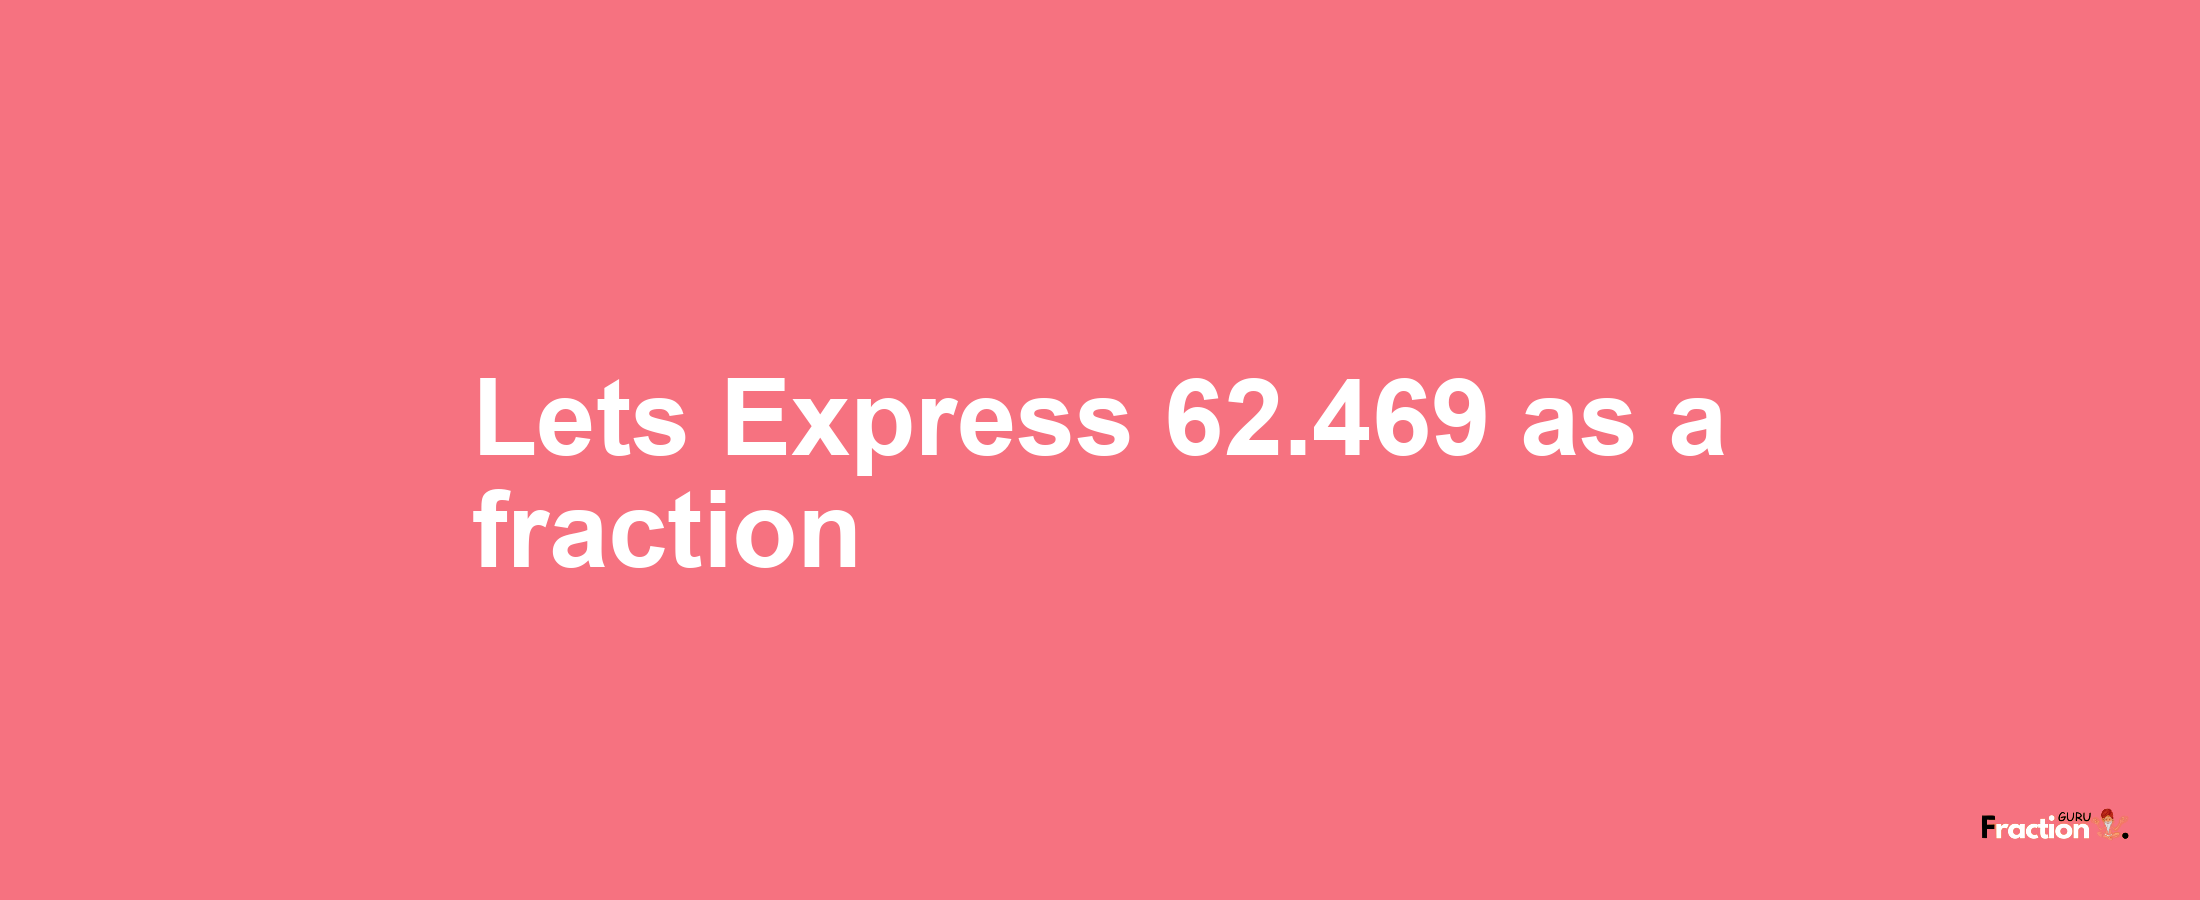 Lets Express 62.469 as afraction